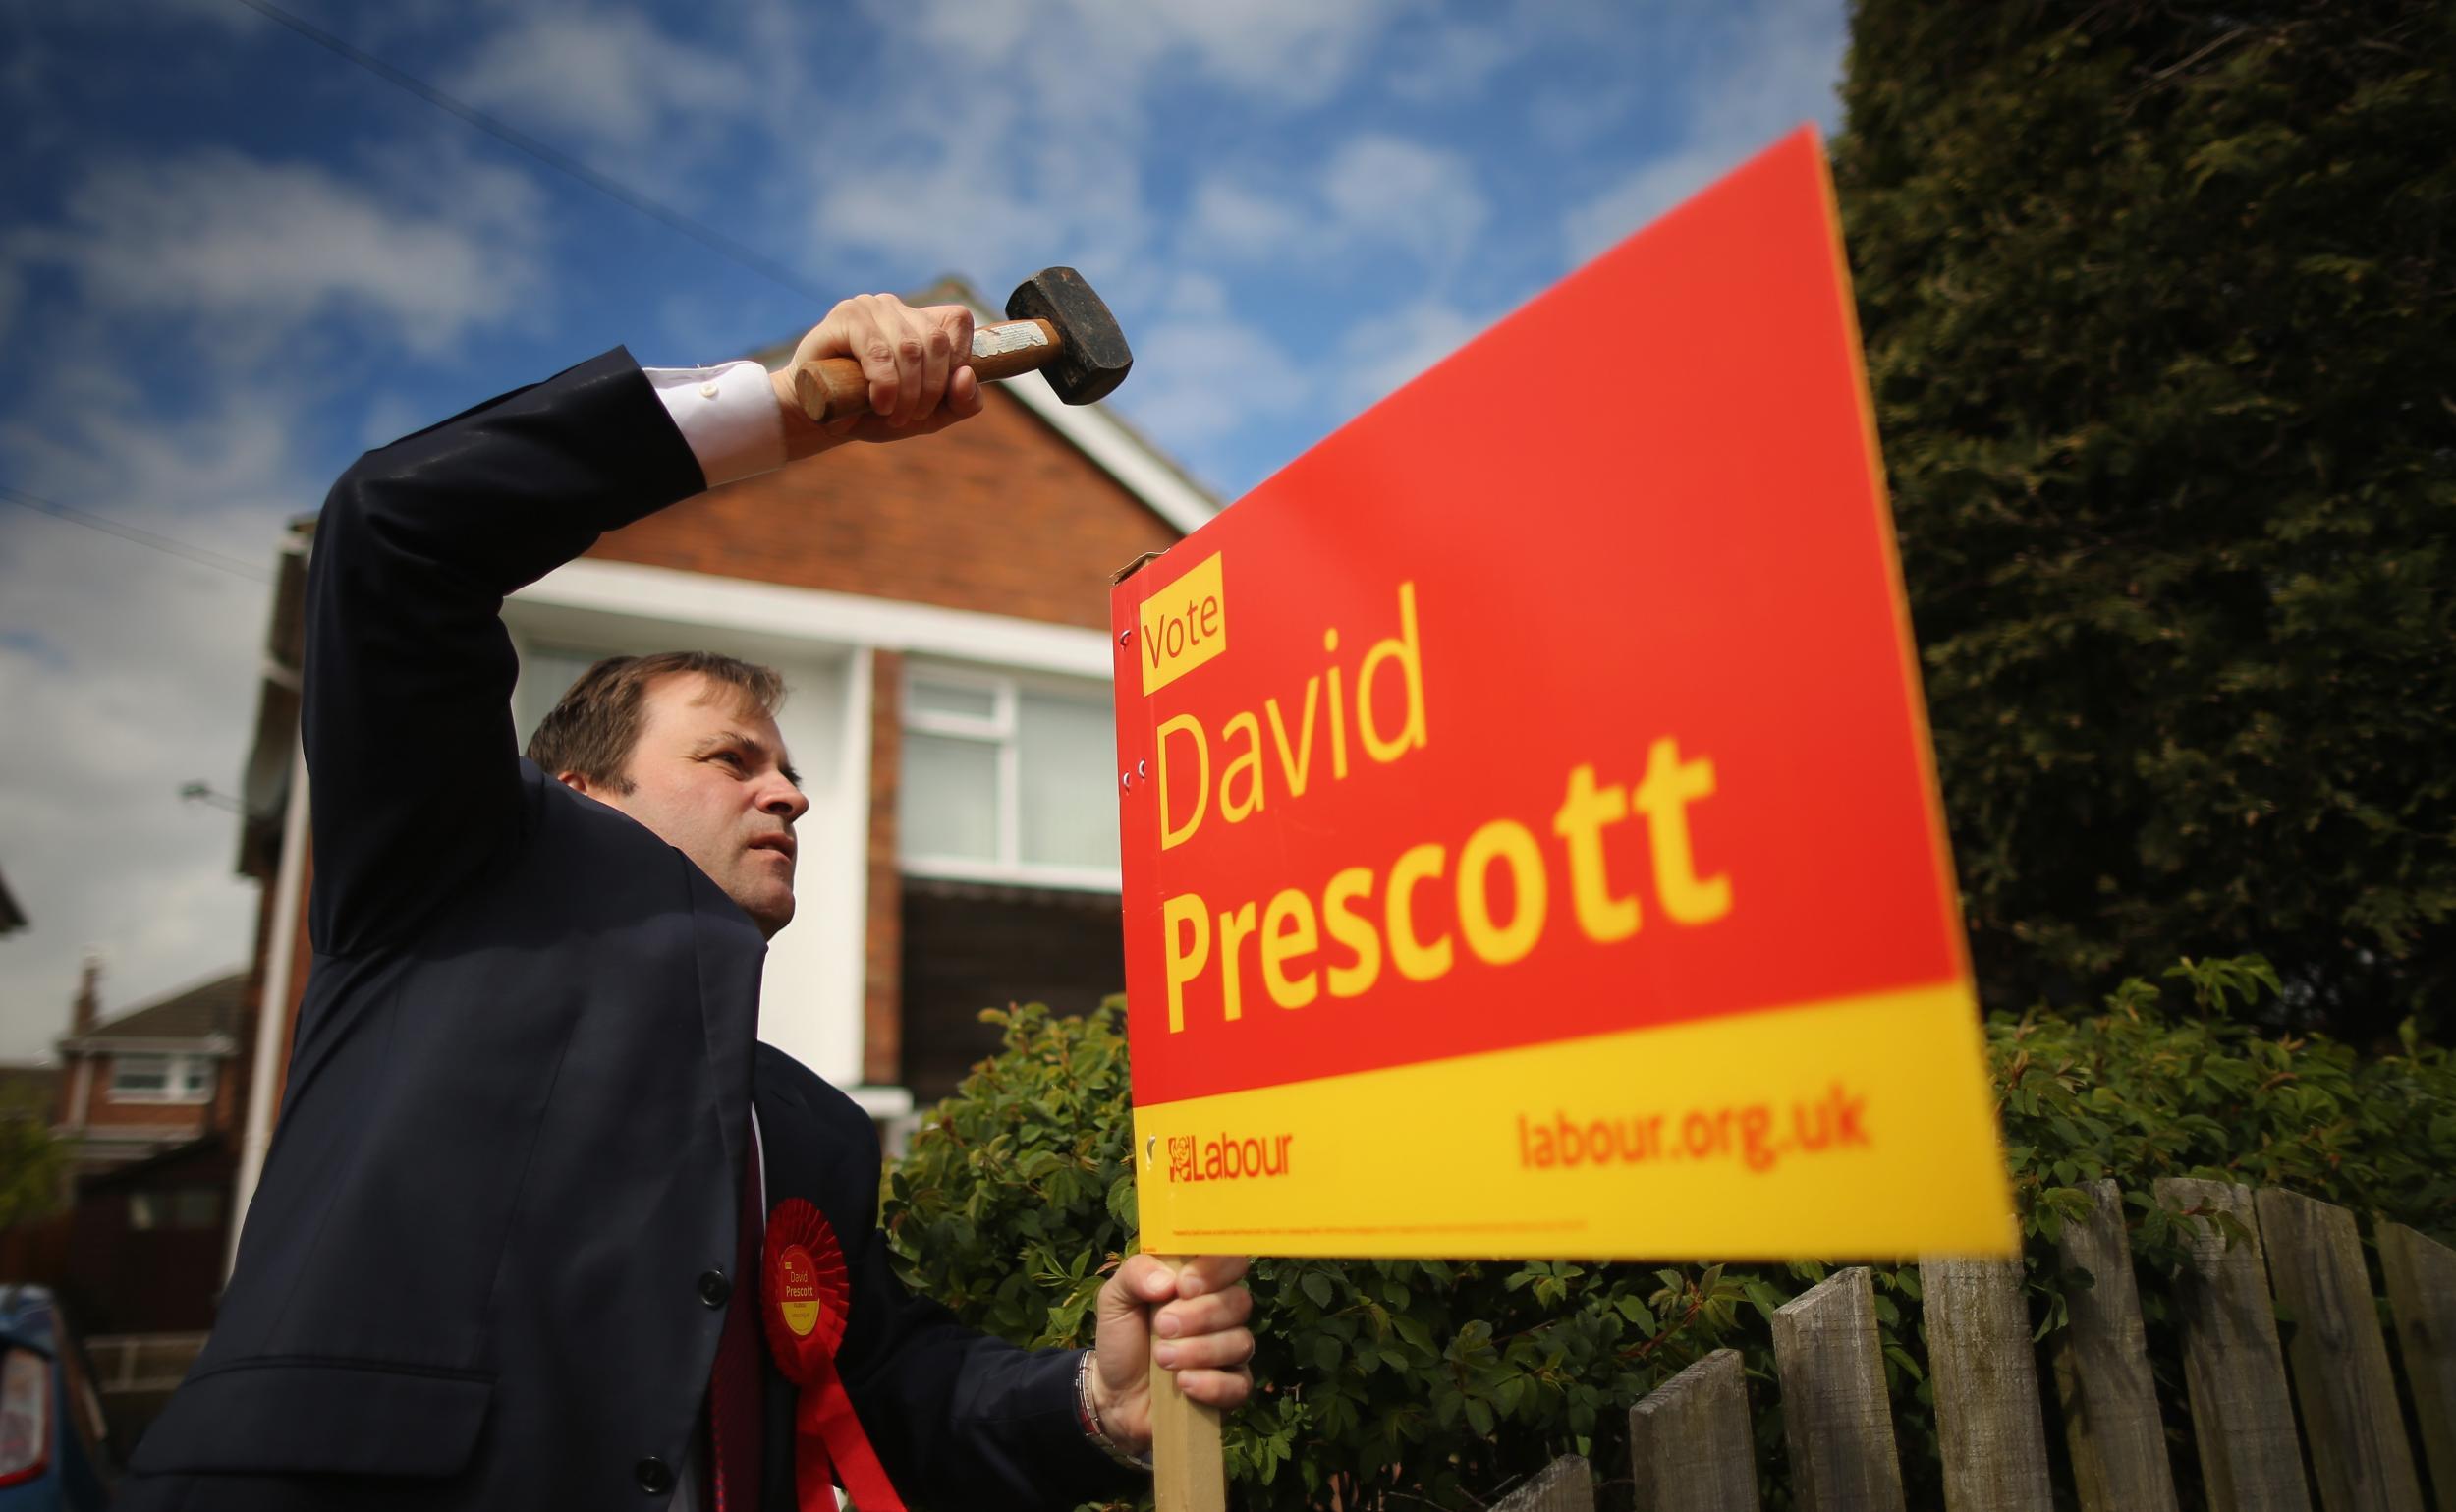 John Prescott's son is appointed Jeremy Corbyn's new speechwriter - The Independent